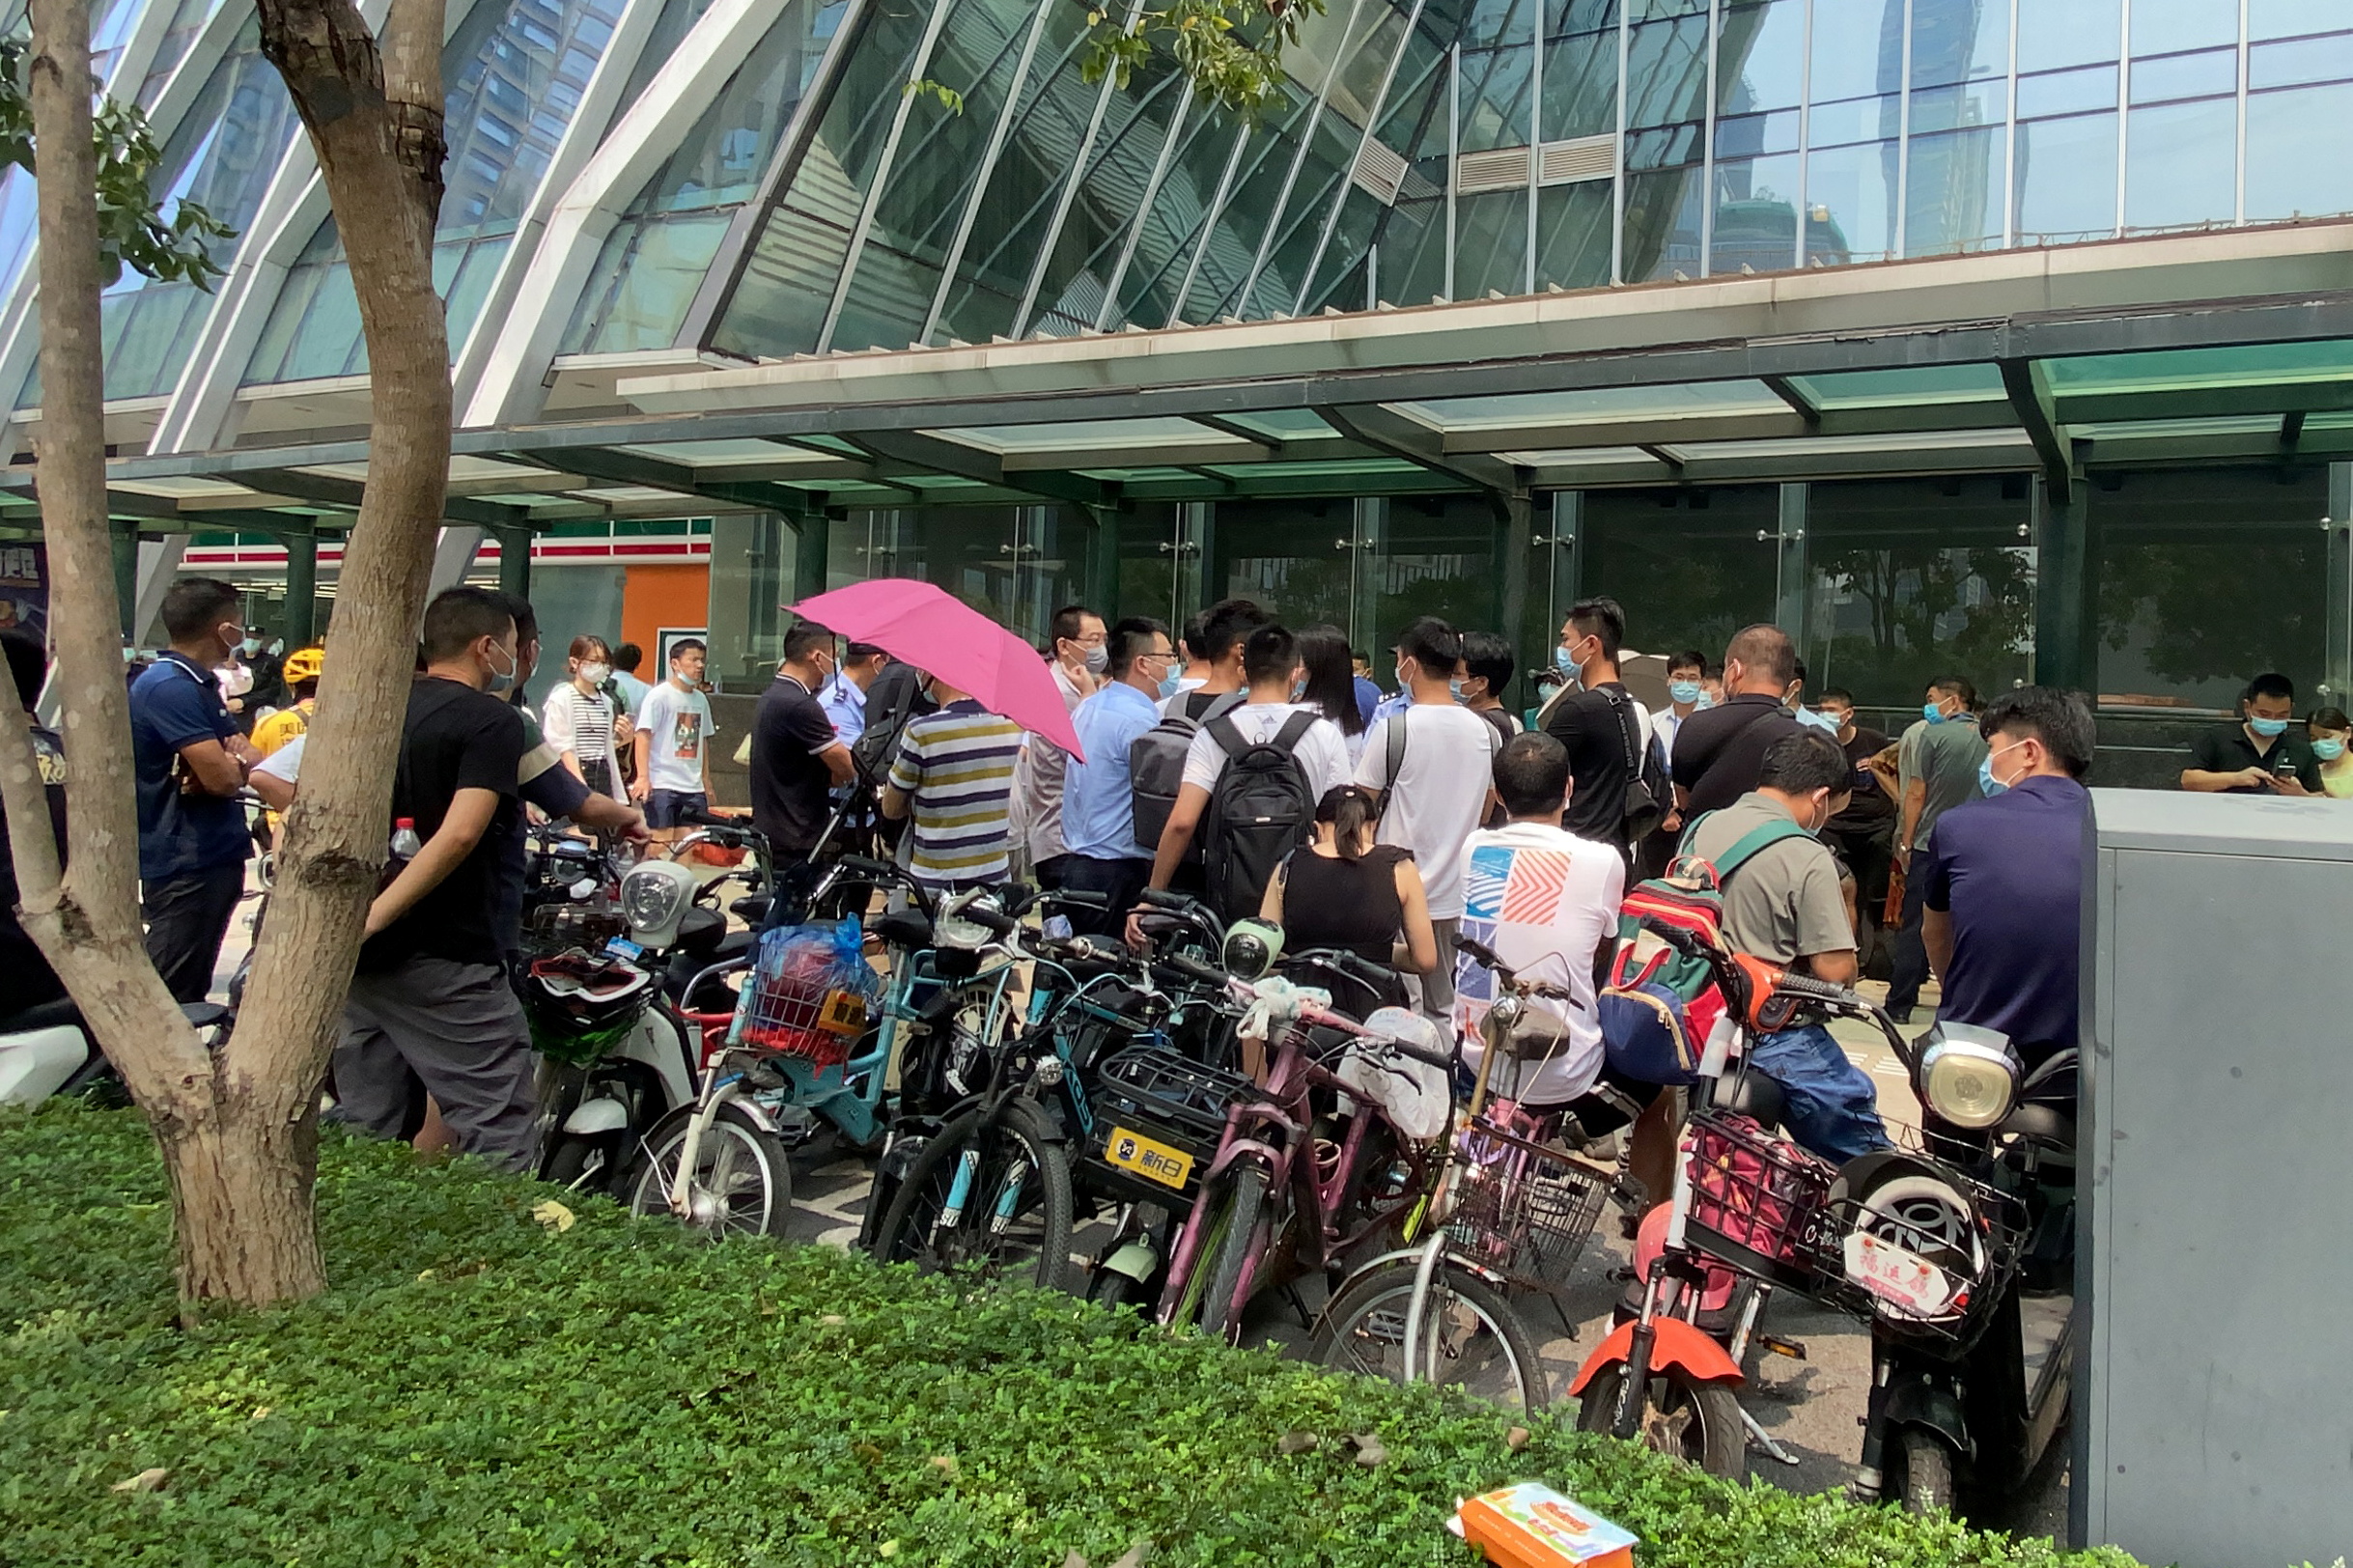 People protest to demand repayment of loans and financial products at the Evergrande's headquarters in Shenzhen